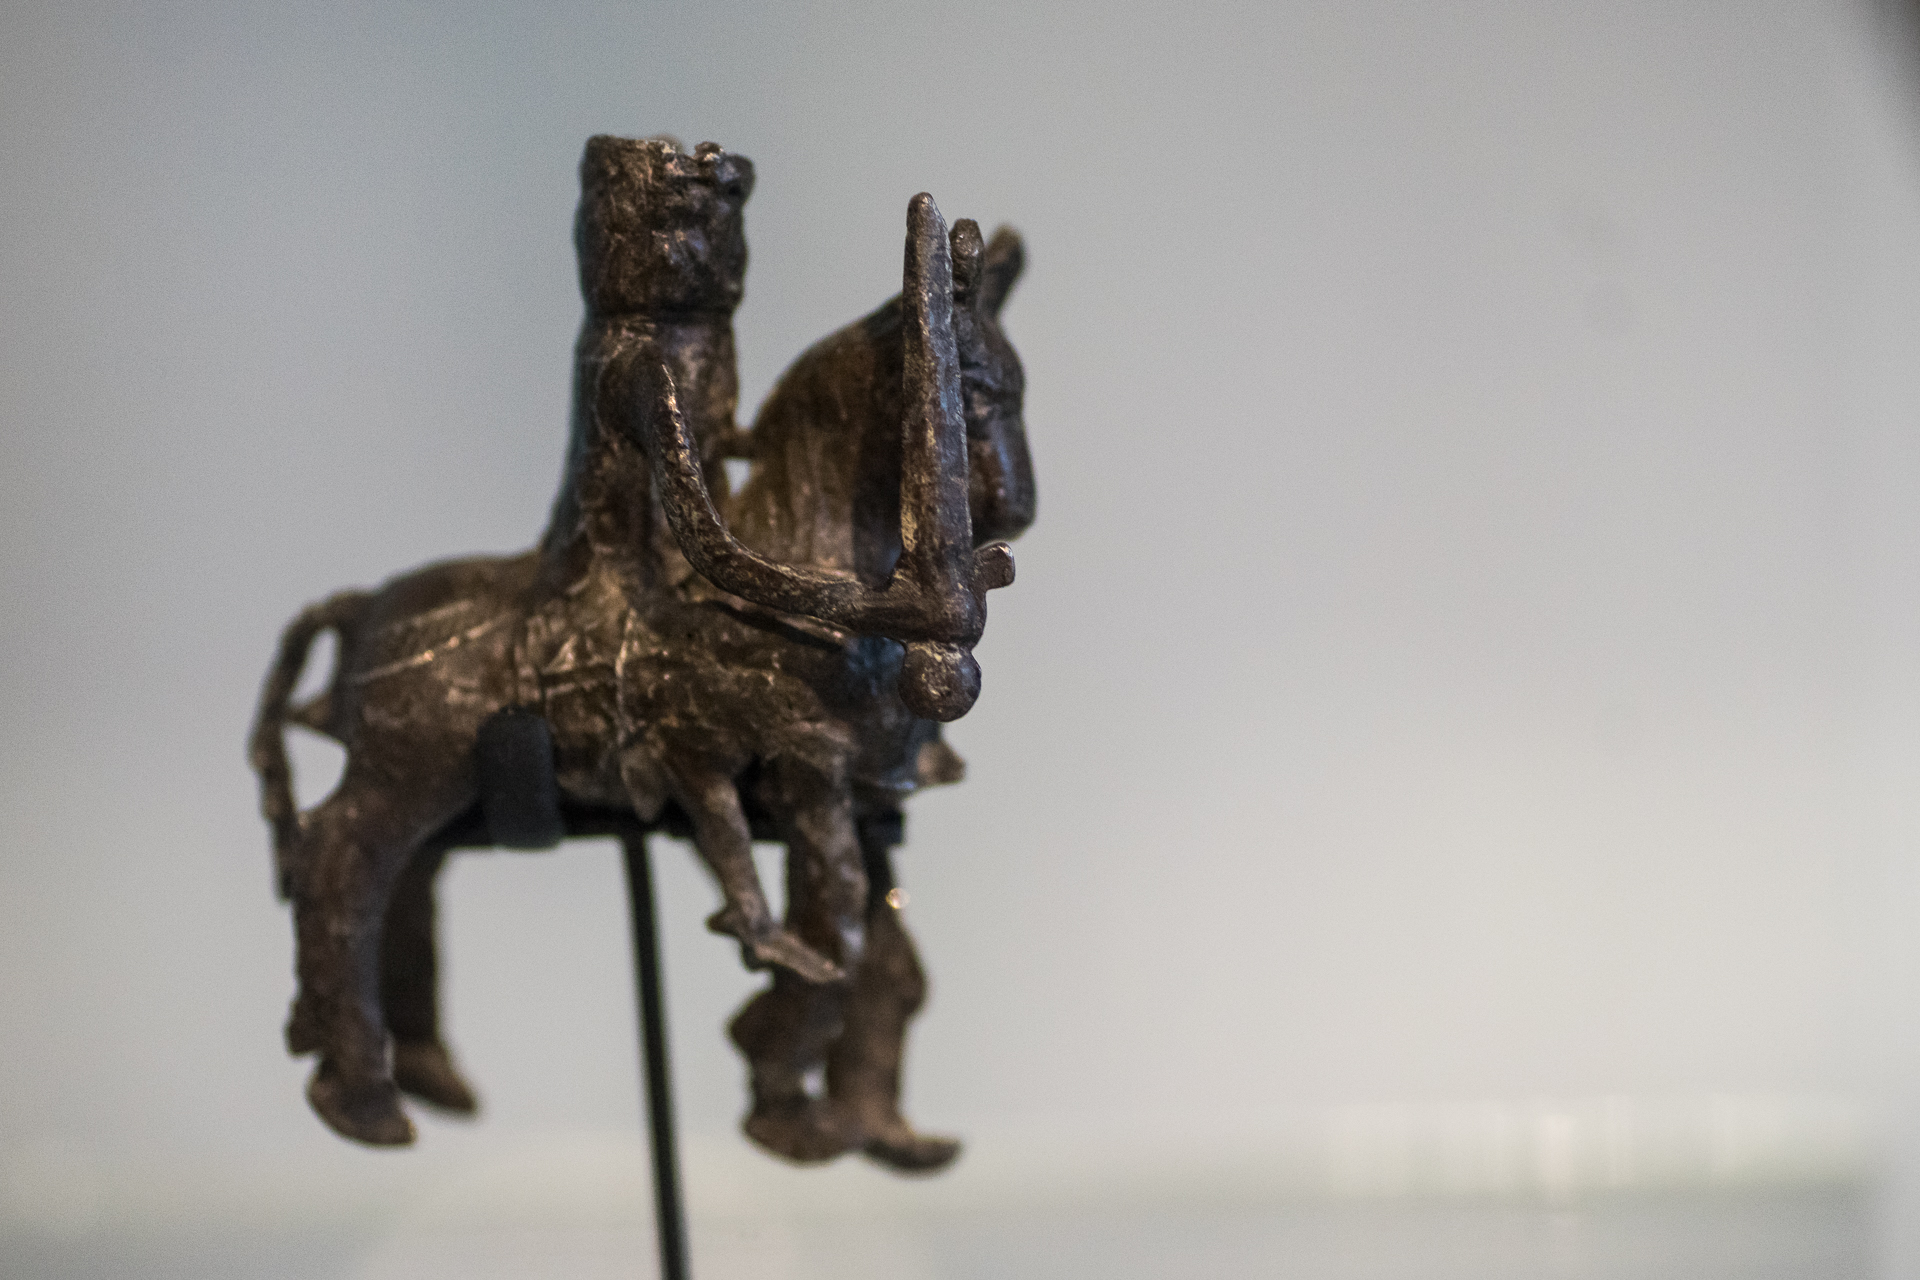 an intricate sculpture of a horse is shown on display